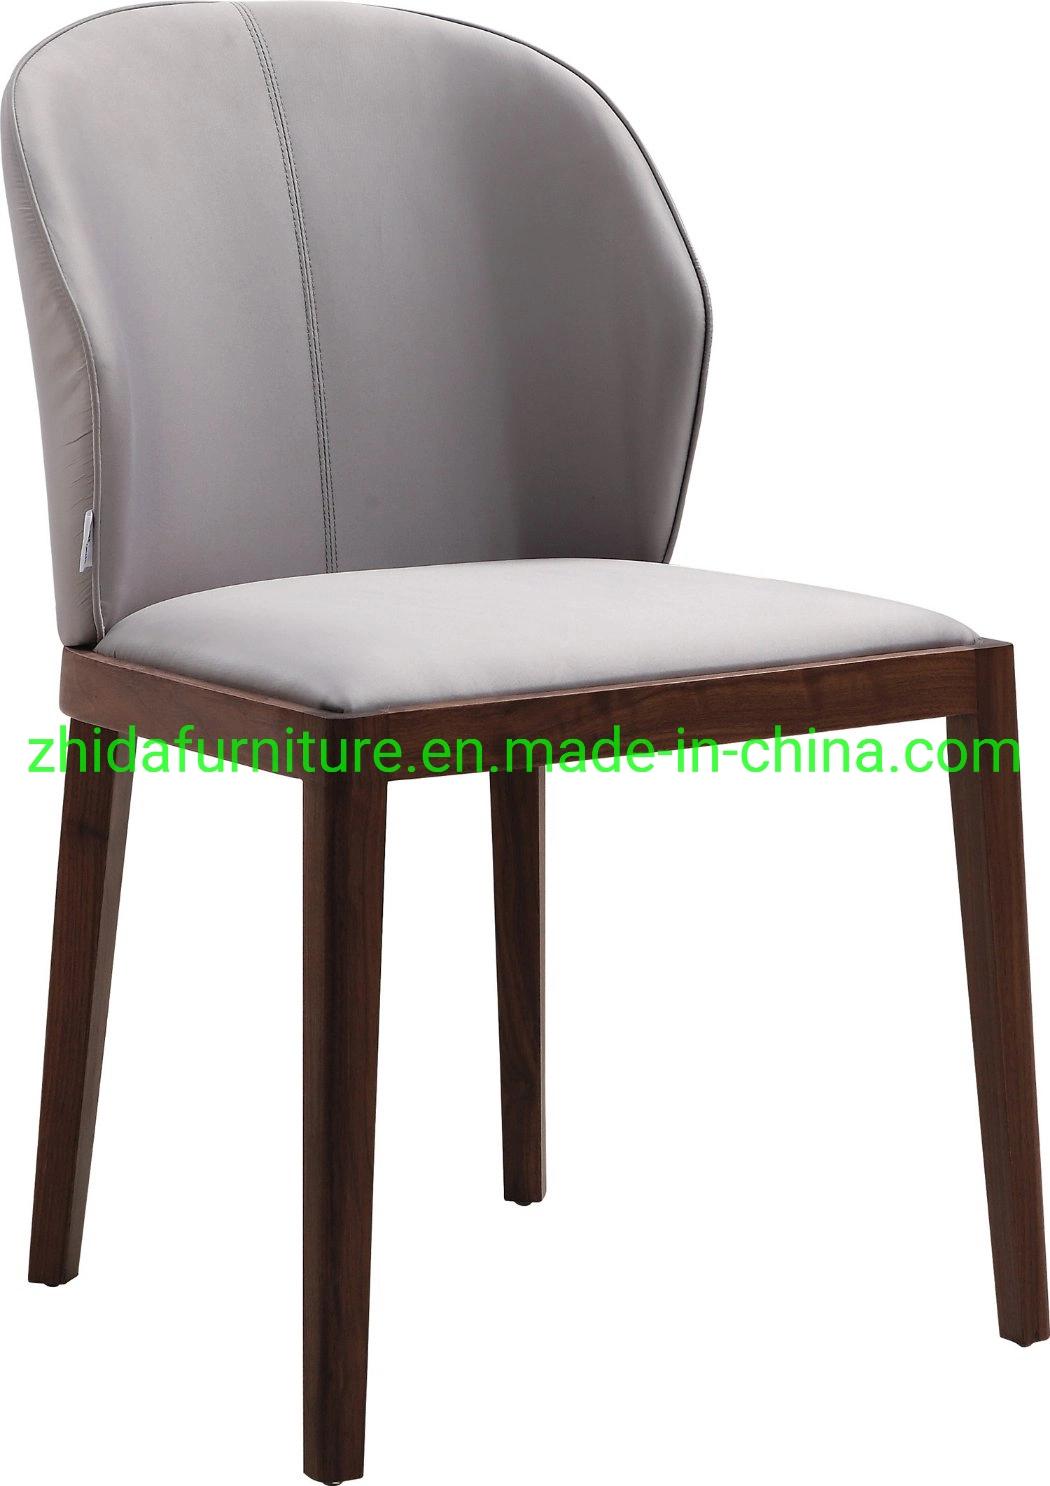 Chinese Living Room Home Furniture Upholstery Top Moderndinning Chair